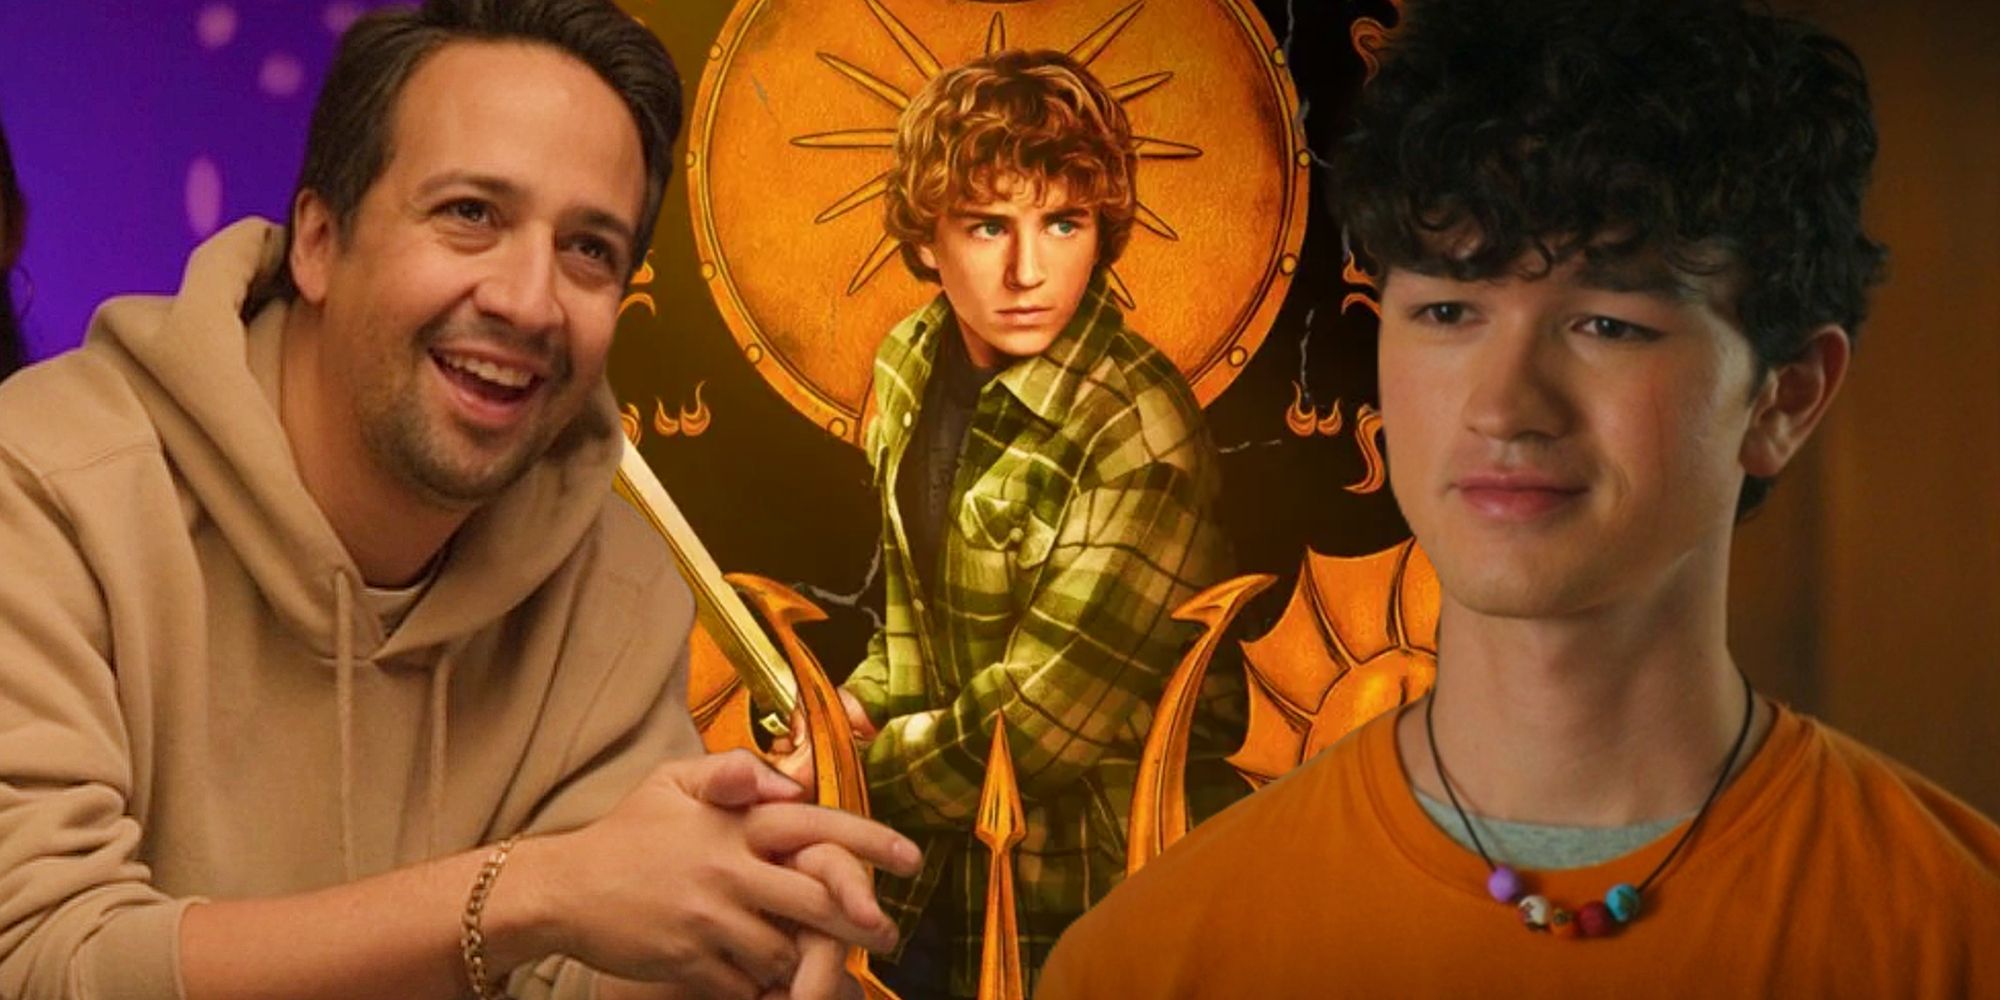 A poster of Percy Jackson holding a sword between Luke and Hermes smiling in the TV show